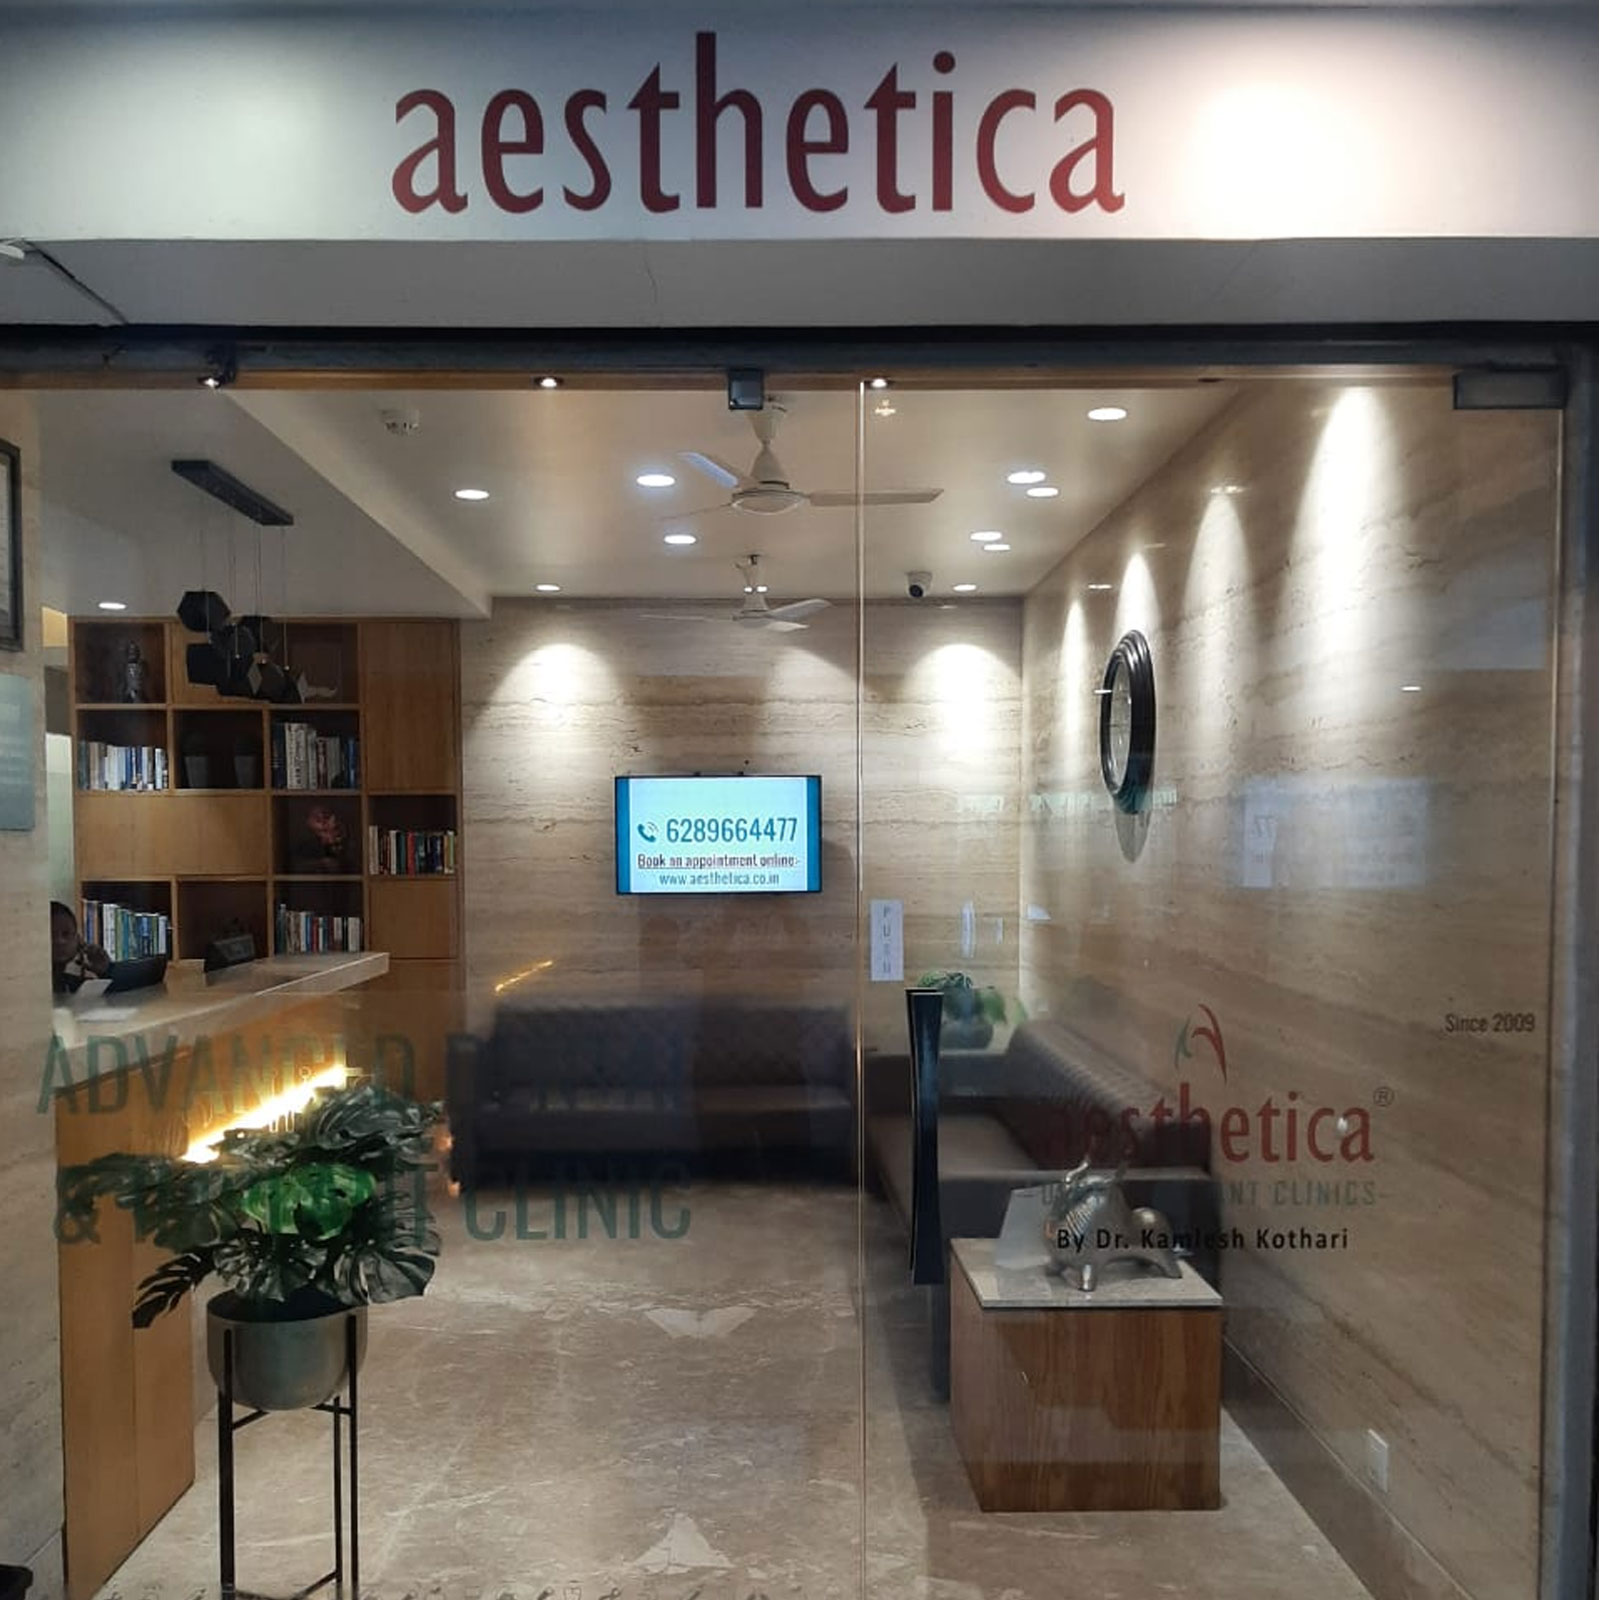 Our Happy Customer @ aesthetica